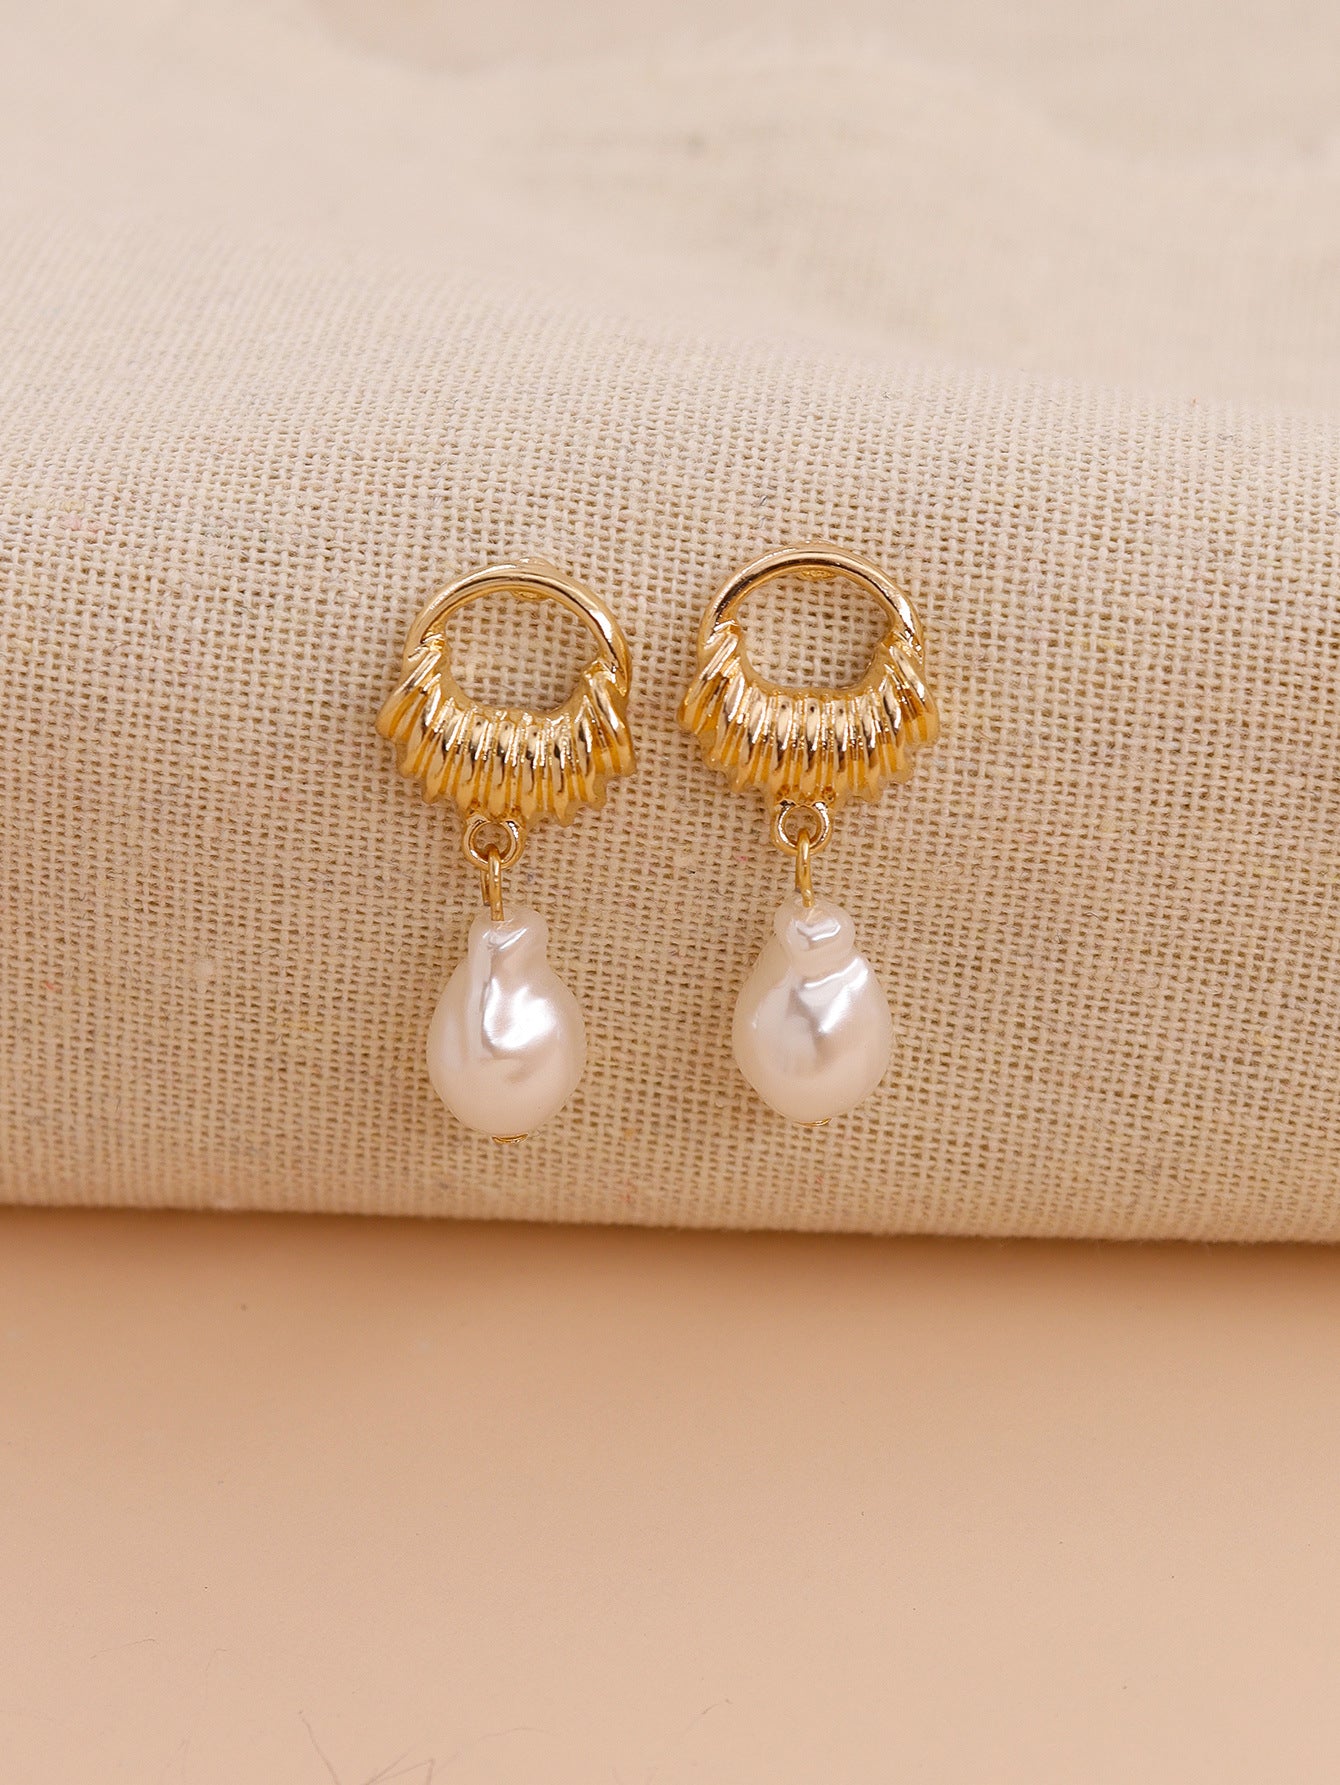 Baroque Pearl Earrings with Unique Alloy Design - Vienna Verve Collection